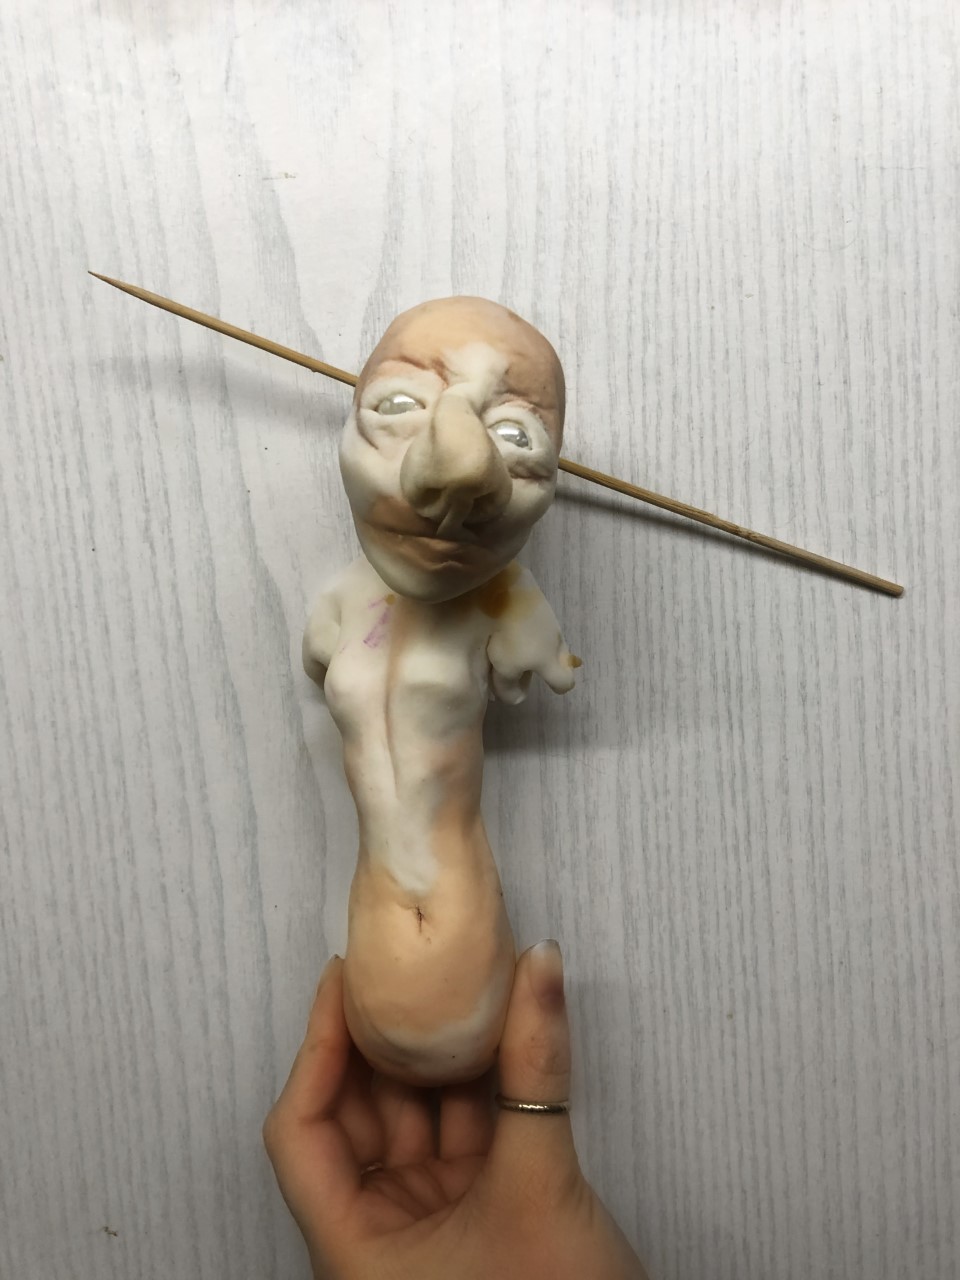 “Shell”. 24cm polymer clay sculpture with wood and marble details representing the dehumanisation you feel as a result of abuse.